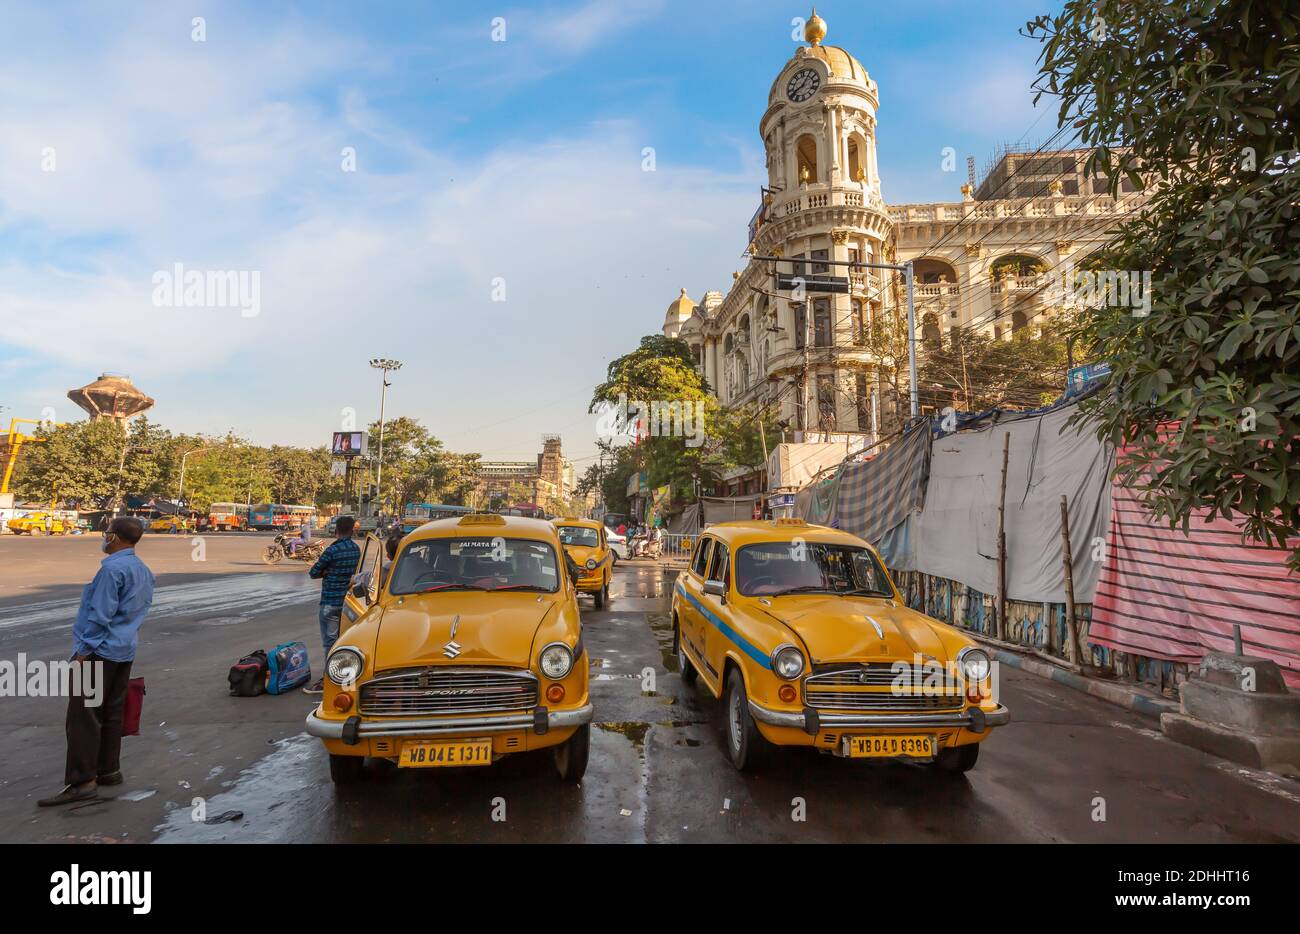 Taxi stand with view of city road near heritage colonial metropolitan building at Esplanade area of Kolkata, India. Stock Photo